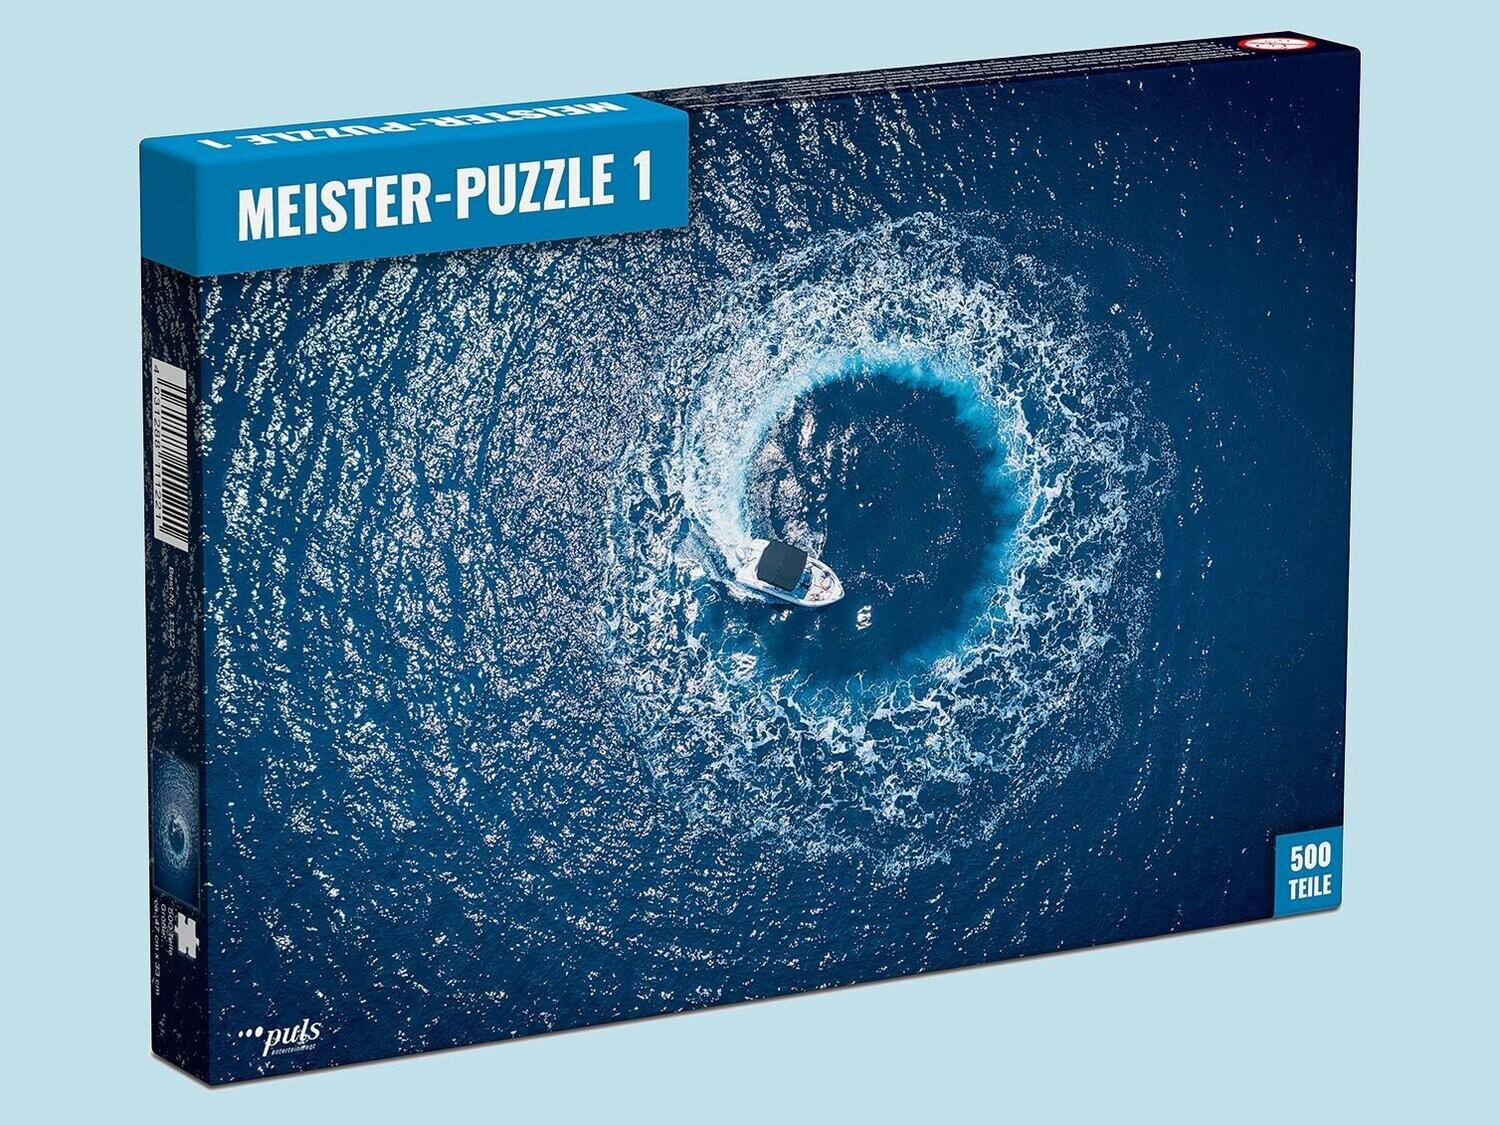 Meister-Puzzle 1